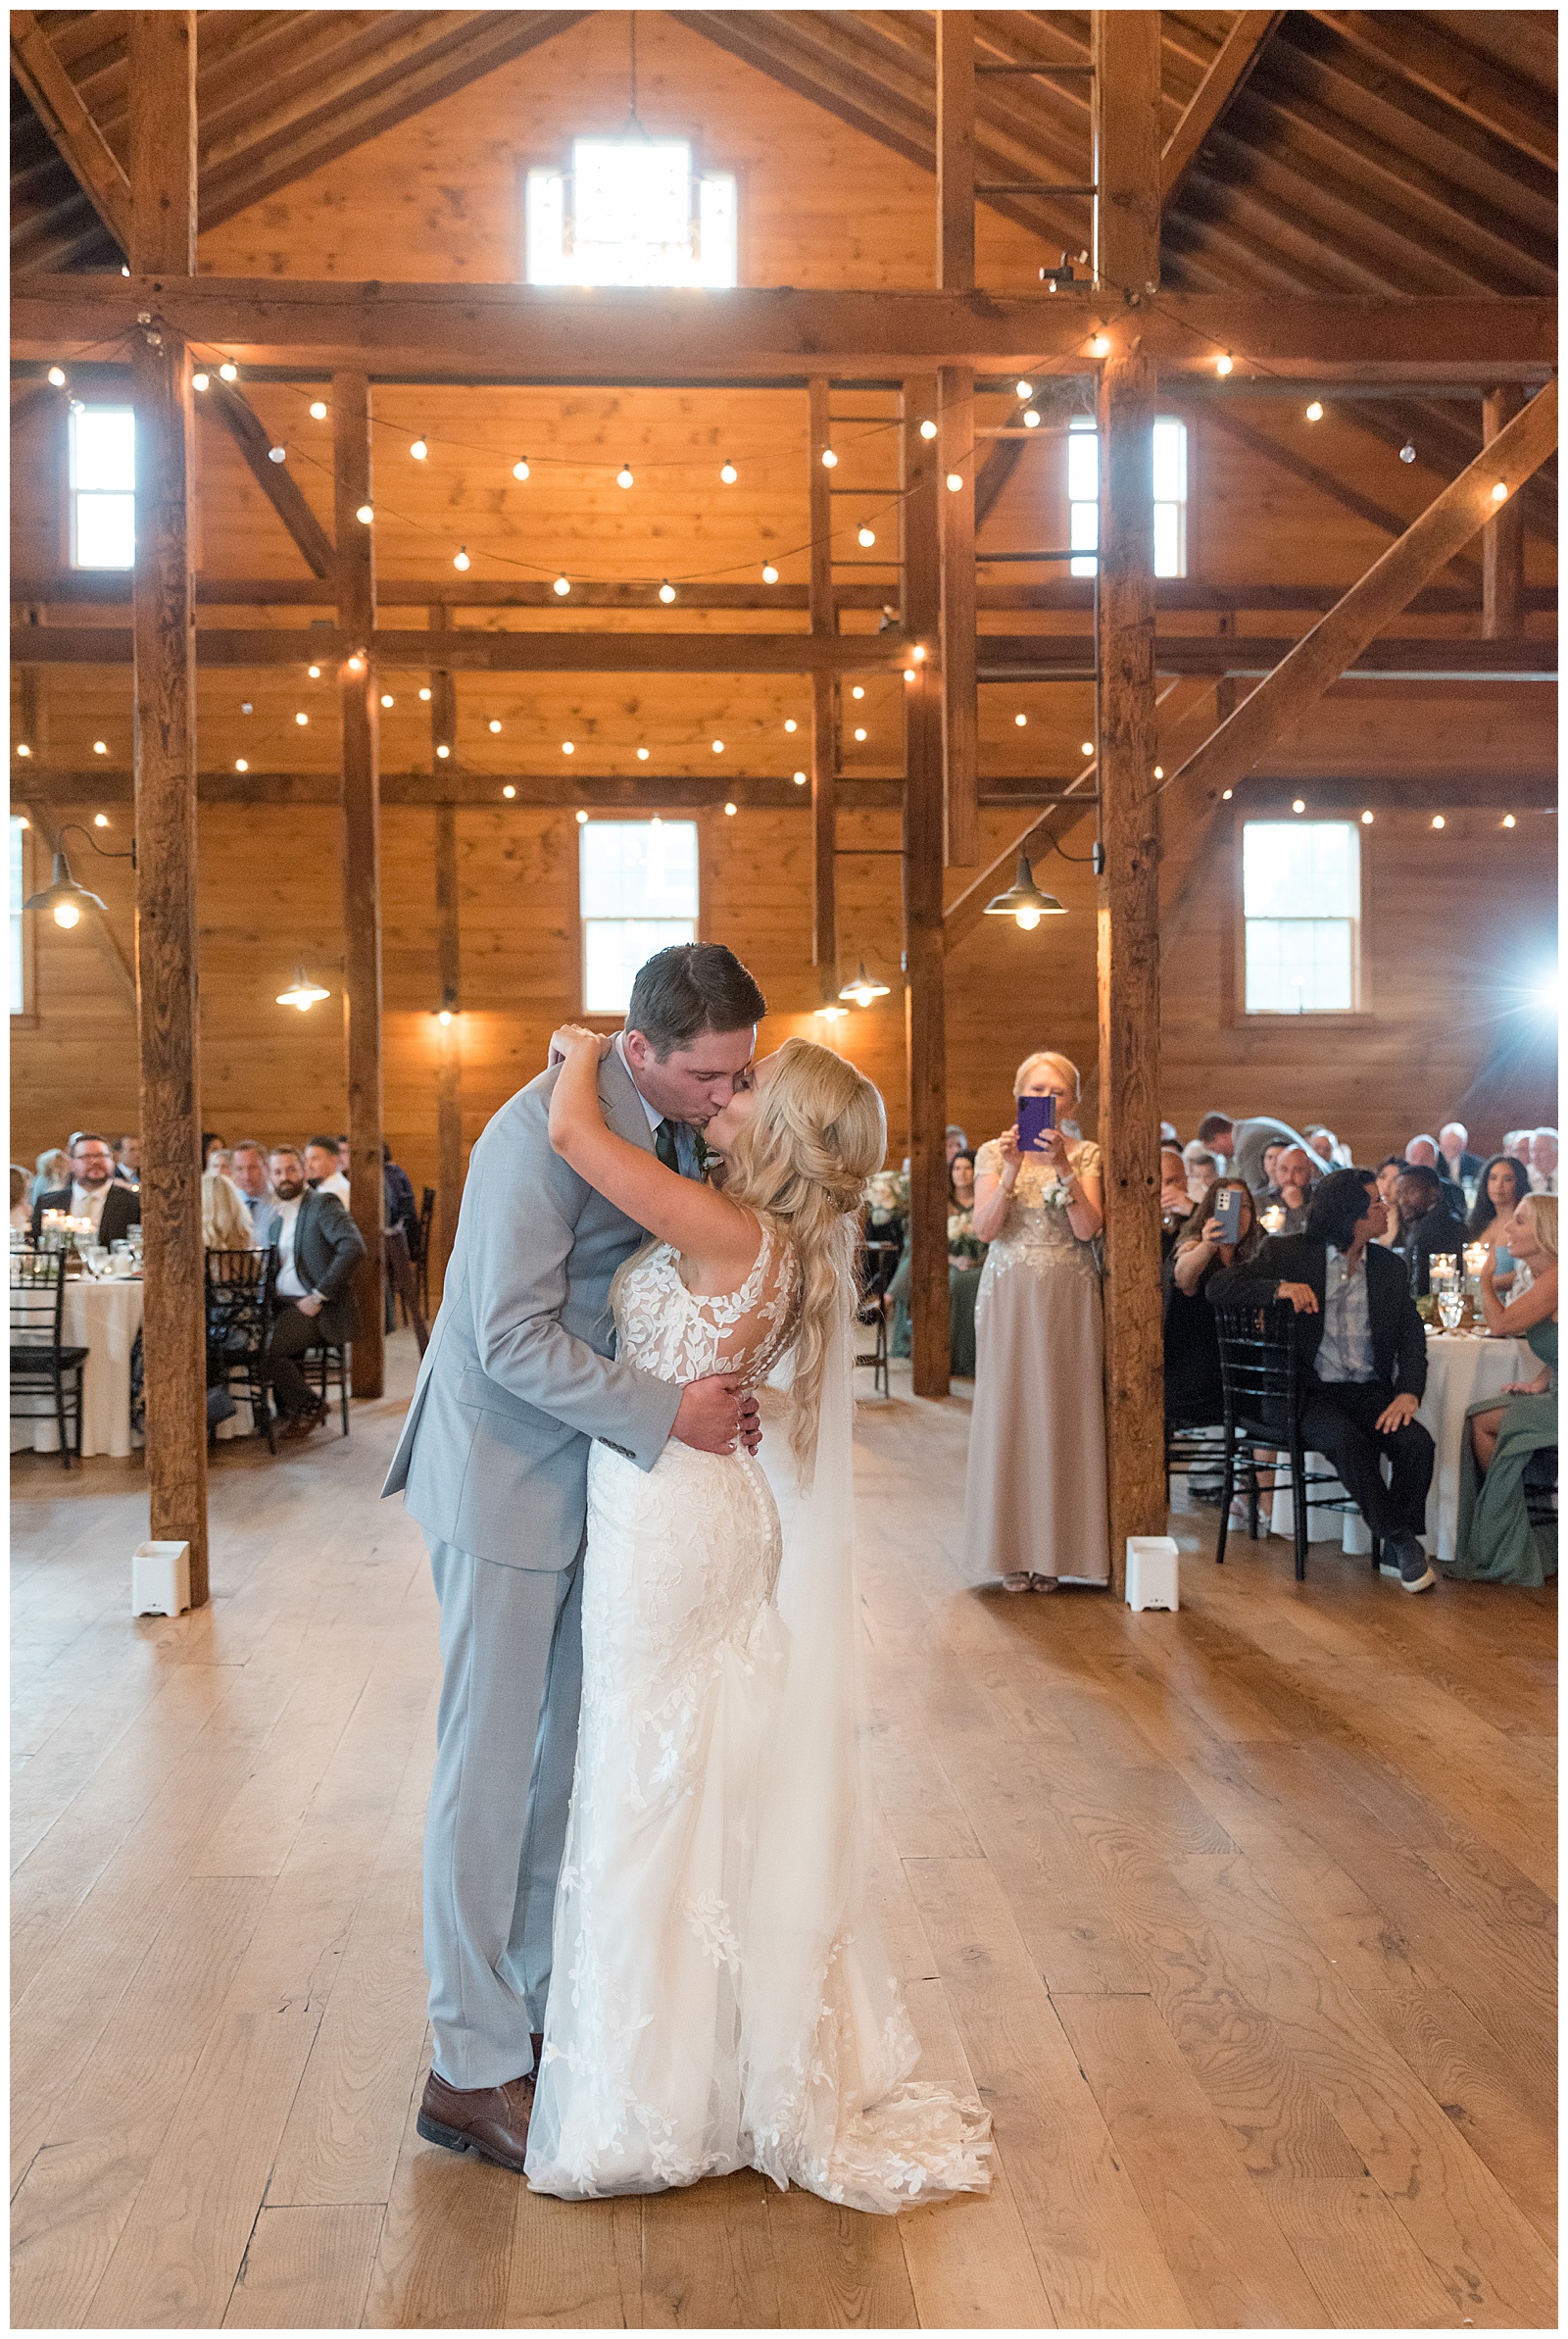 couple sharing a kiss during their first dance at barn wedding reception at historic ashland in wrightsville pennsylvania